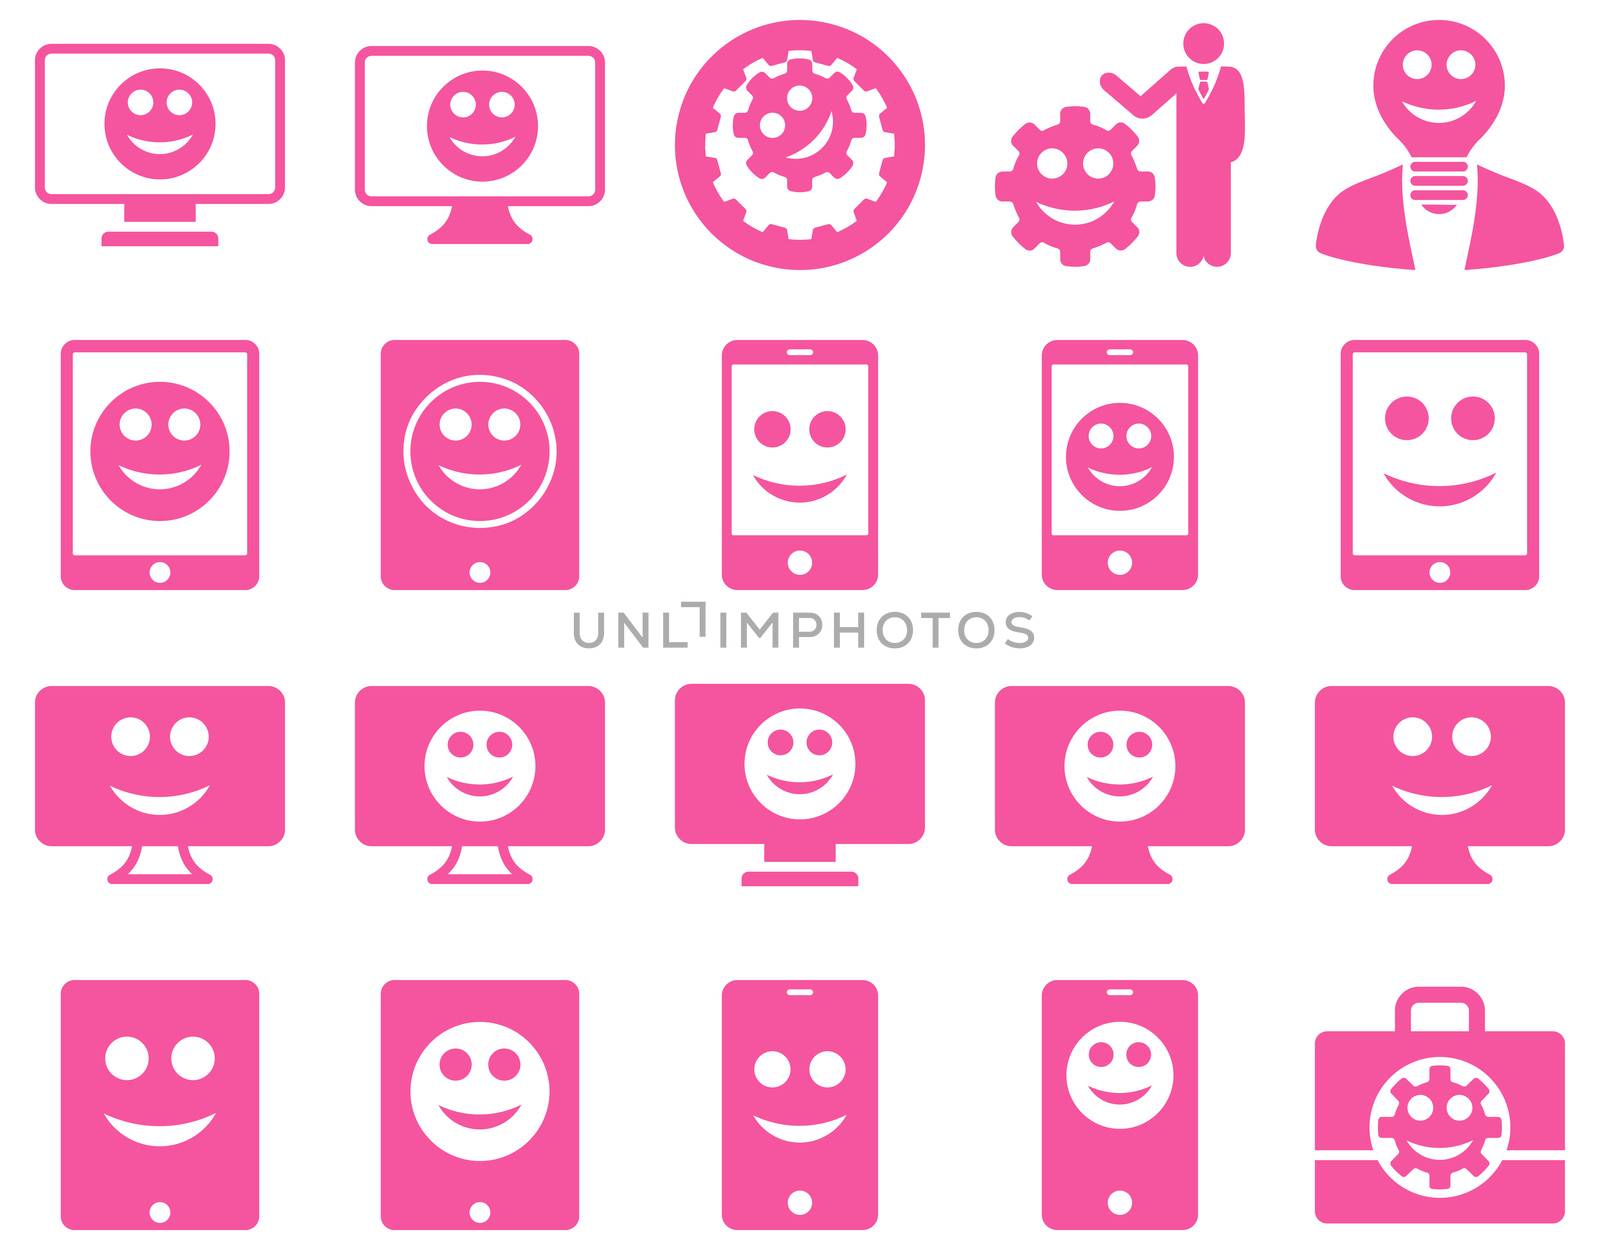 Tools, options, smiles, displays, devices icons by ahasoft